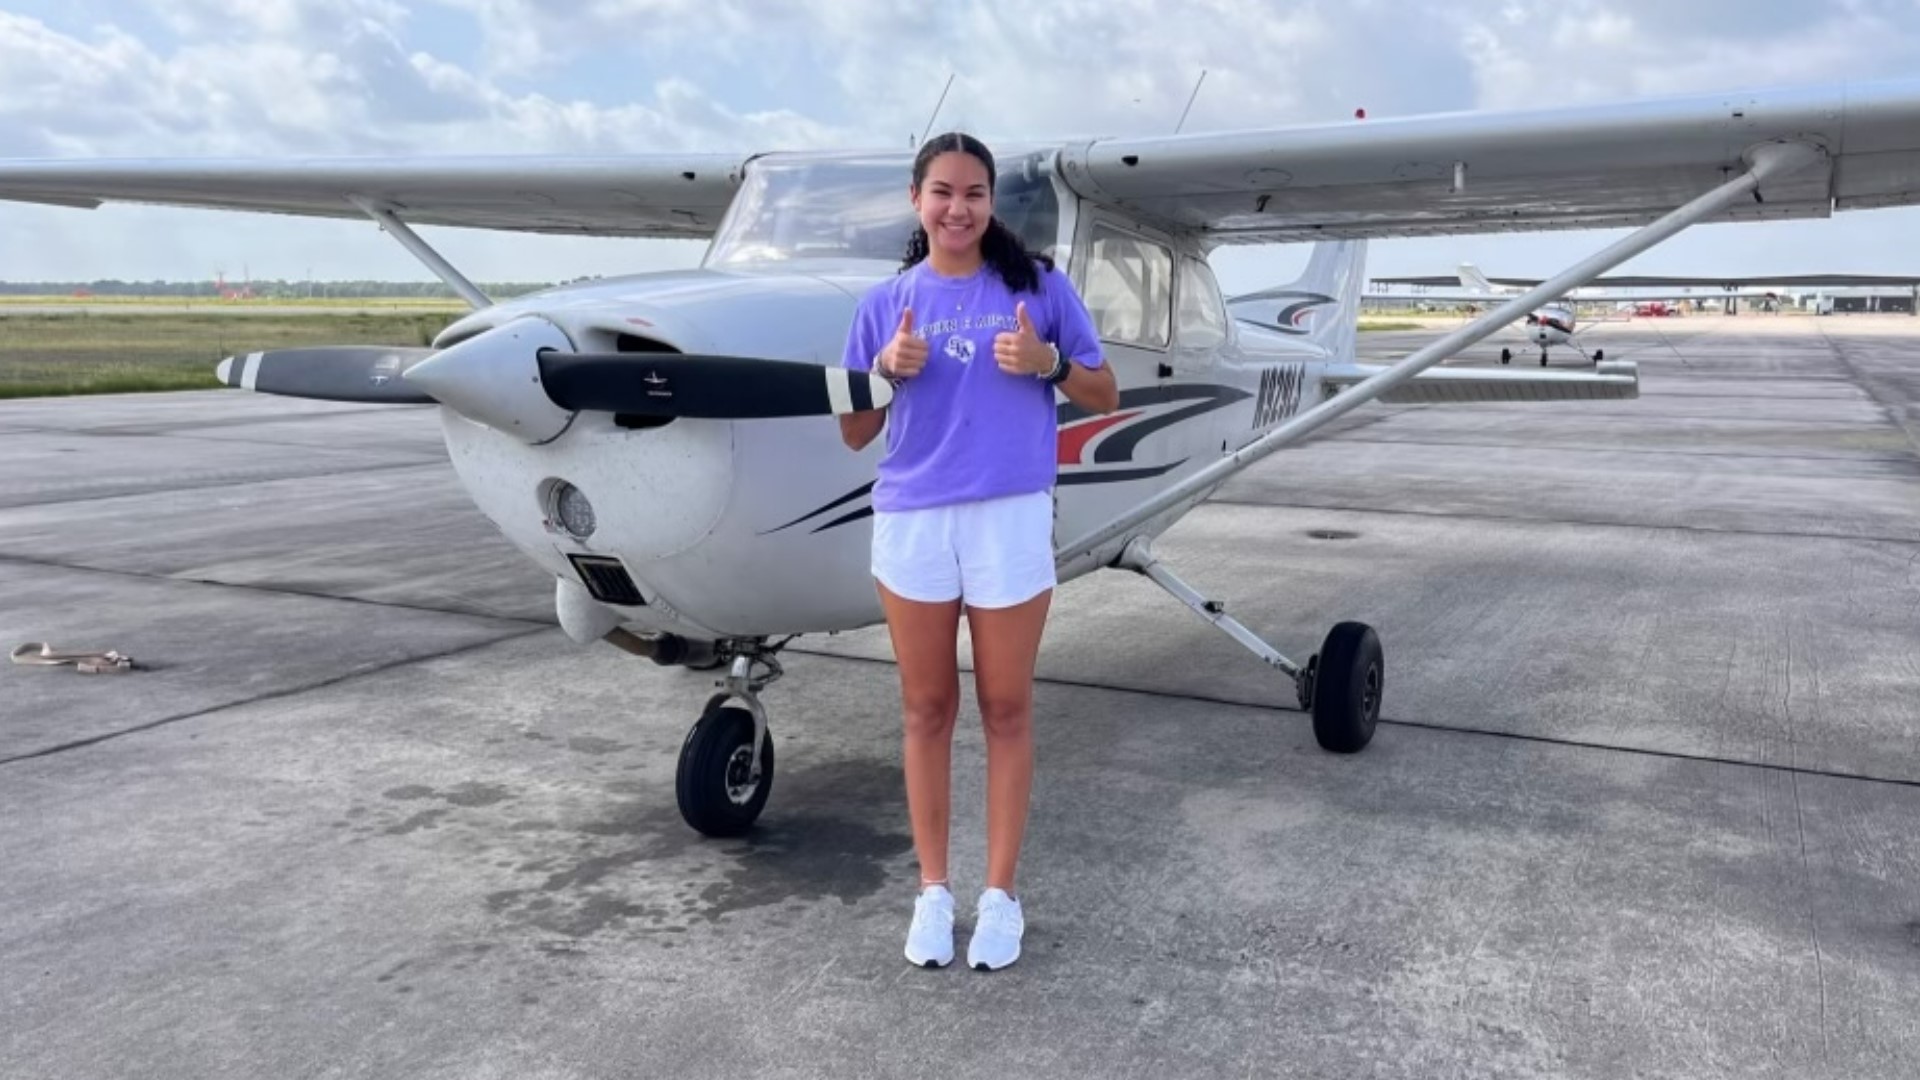 17-year-old Jayden Walker's passion for aviation and desire to grow the industry has earned her a scholarship named after a heroic pilot